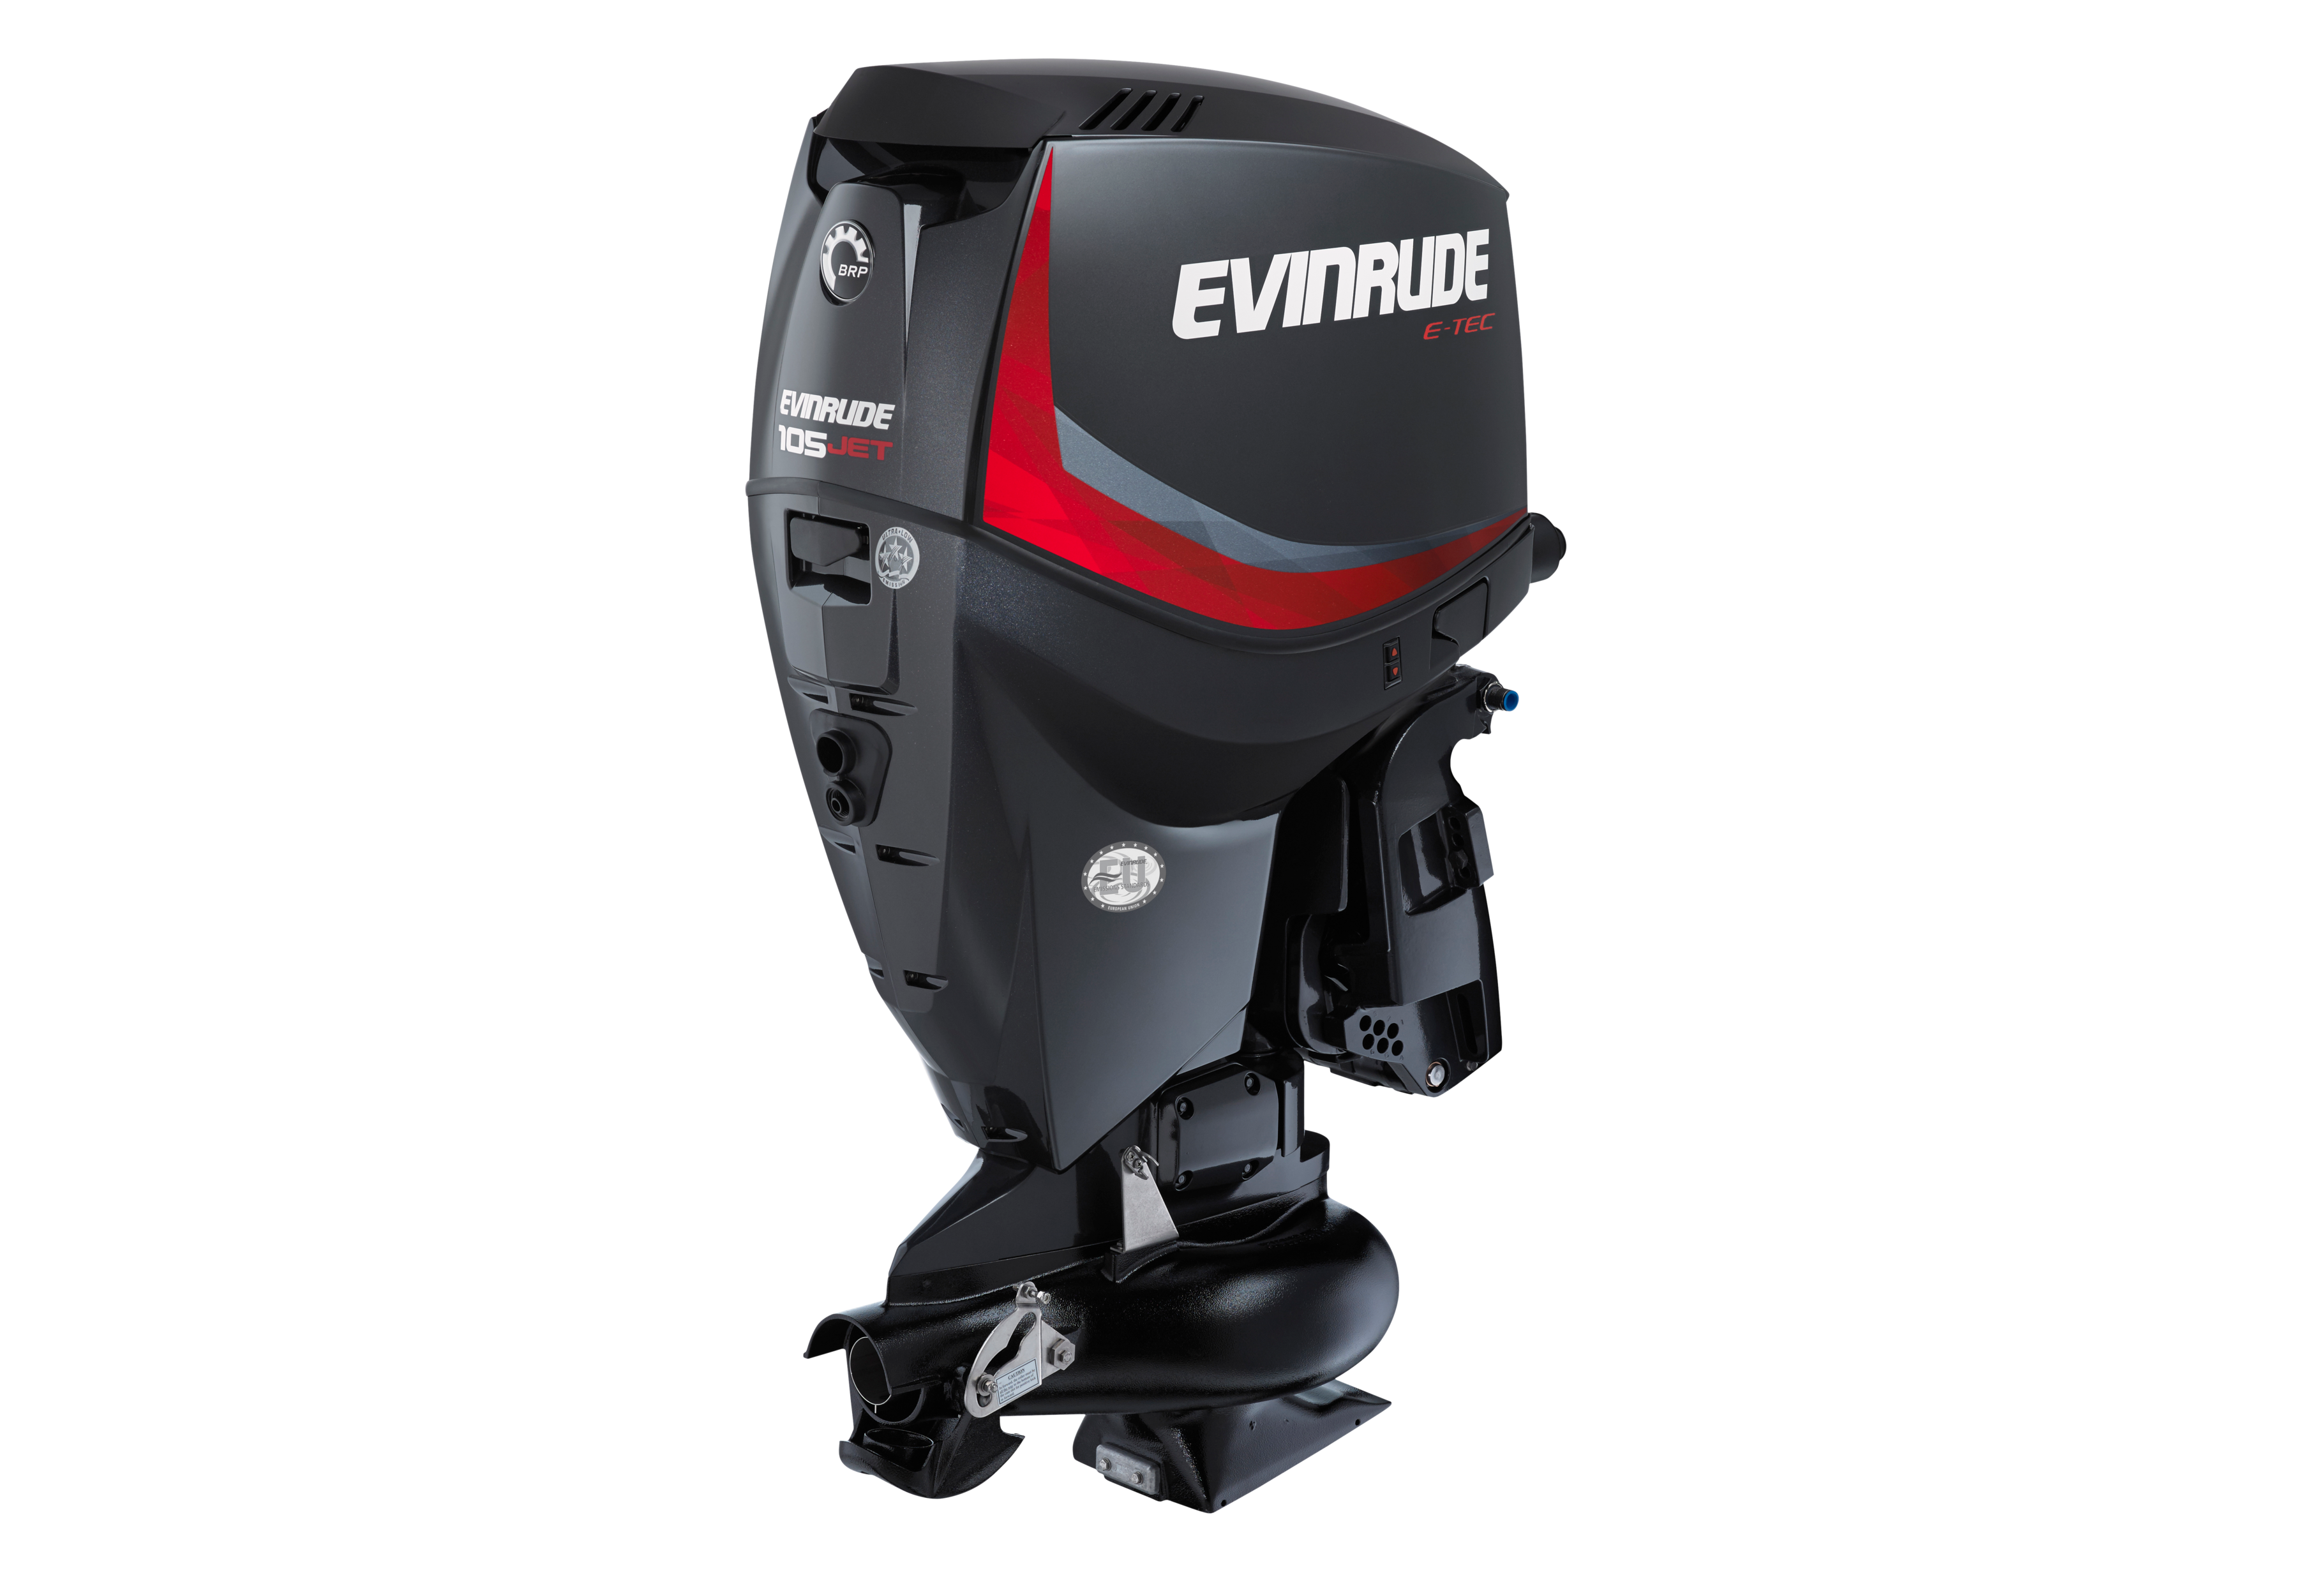 105 Hp Jet Series Boat Motor by Evinrude